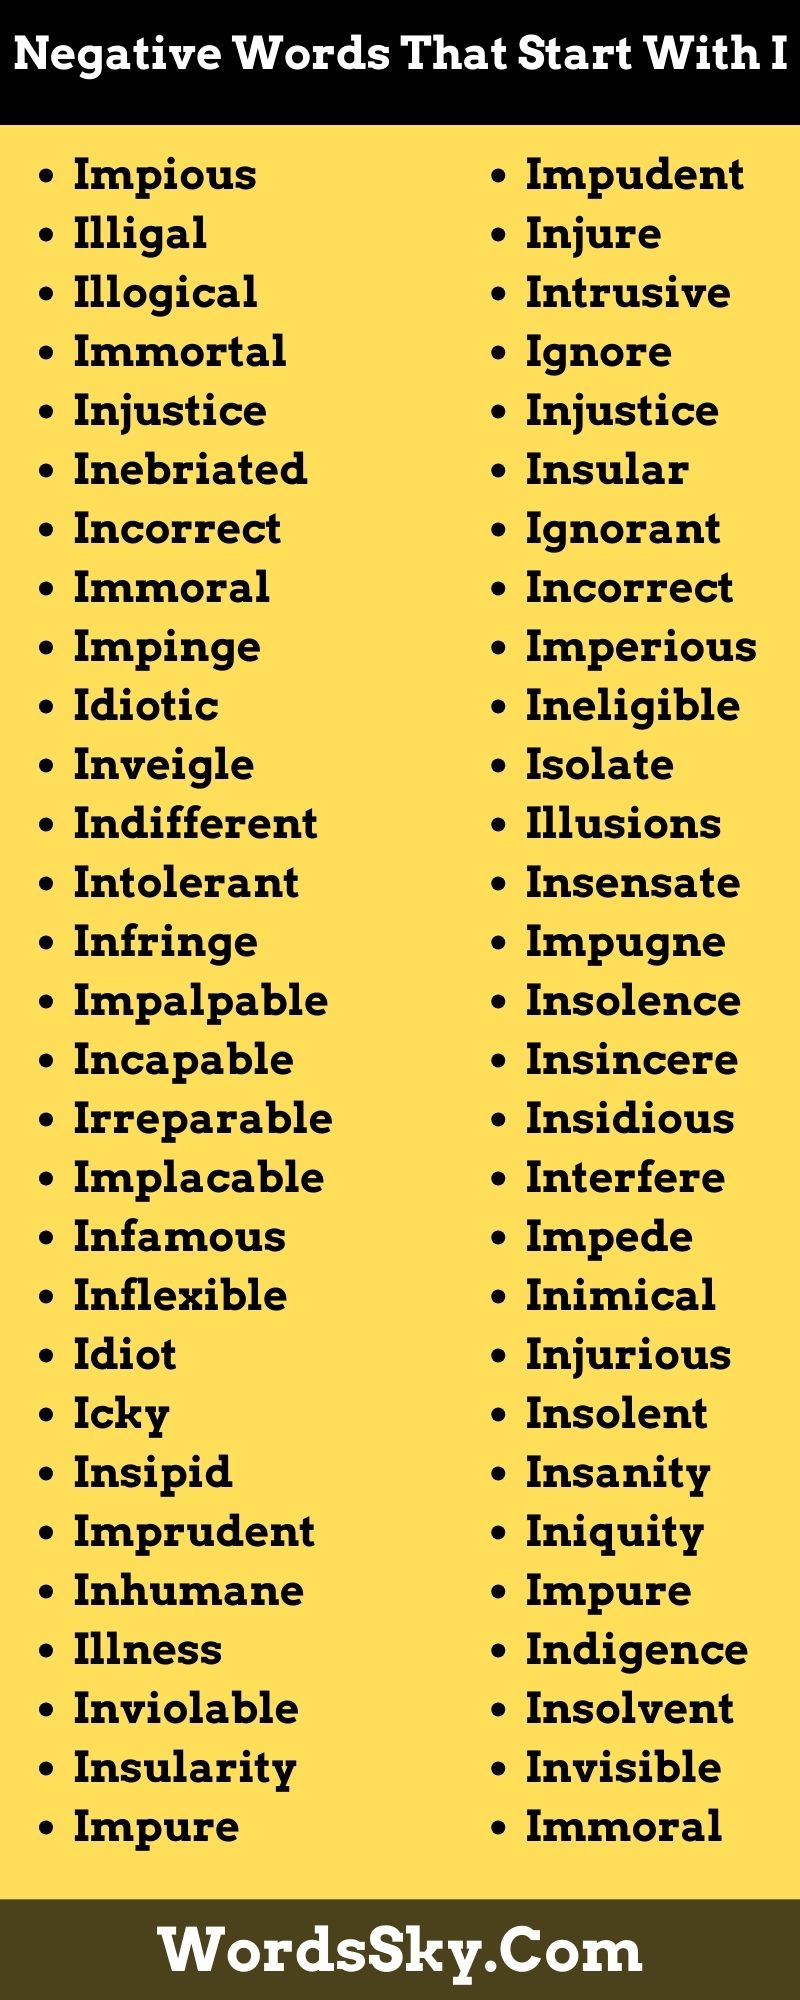 Negative Words That Start With I